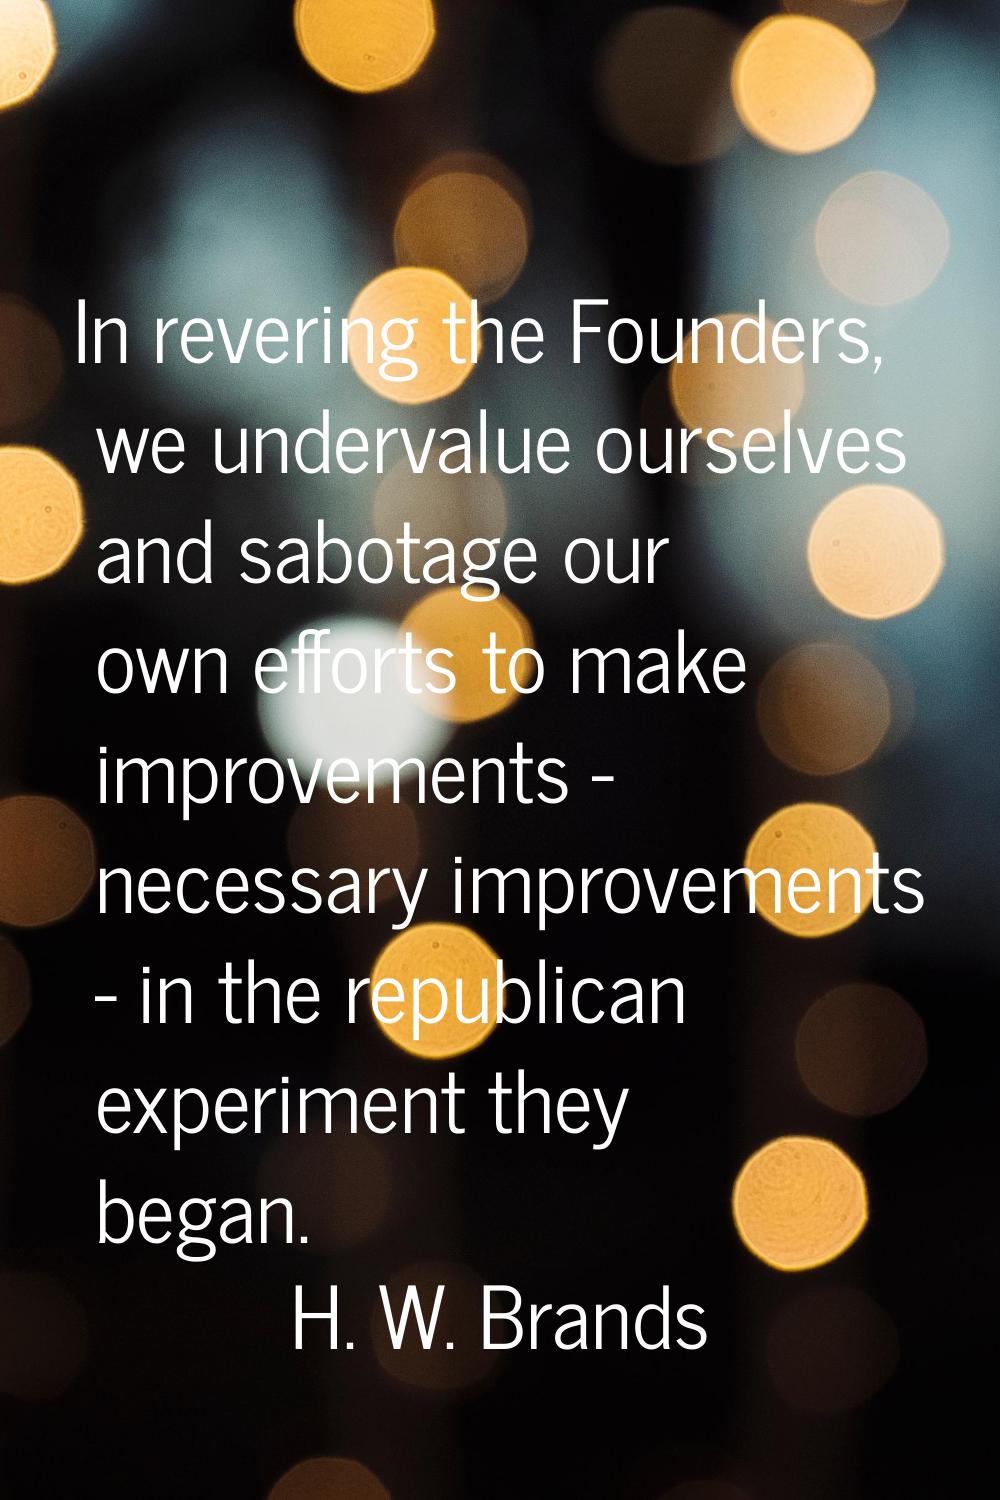 In revering the Founders, we undervalue ourselves and sabotage our own efforts to make improvements